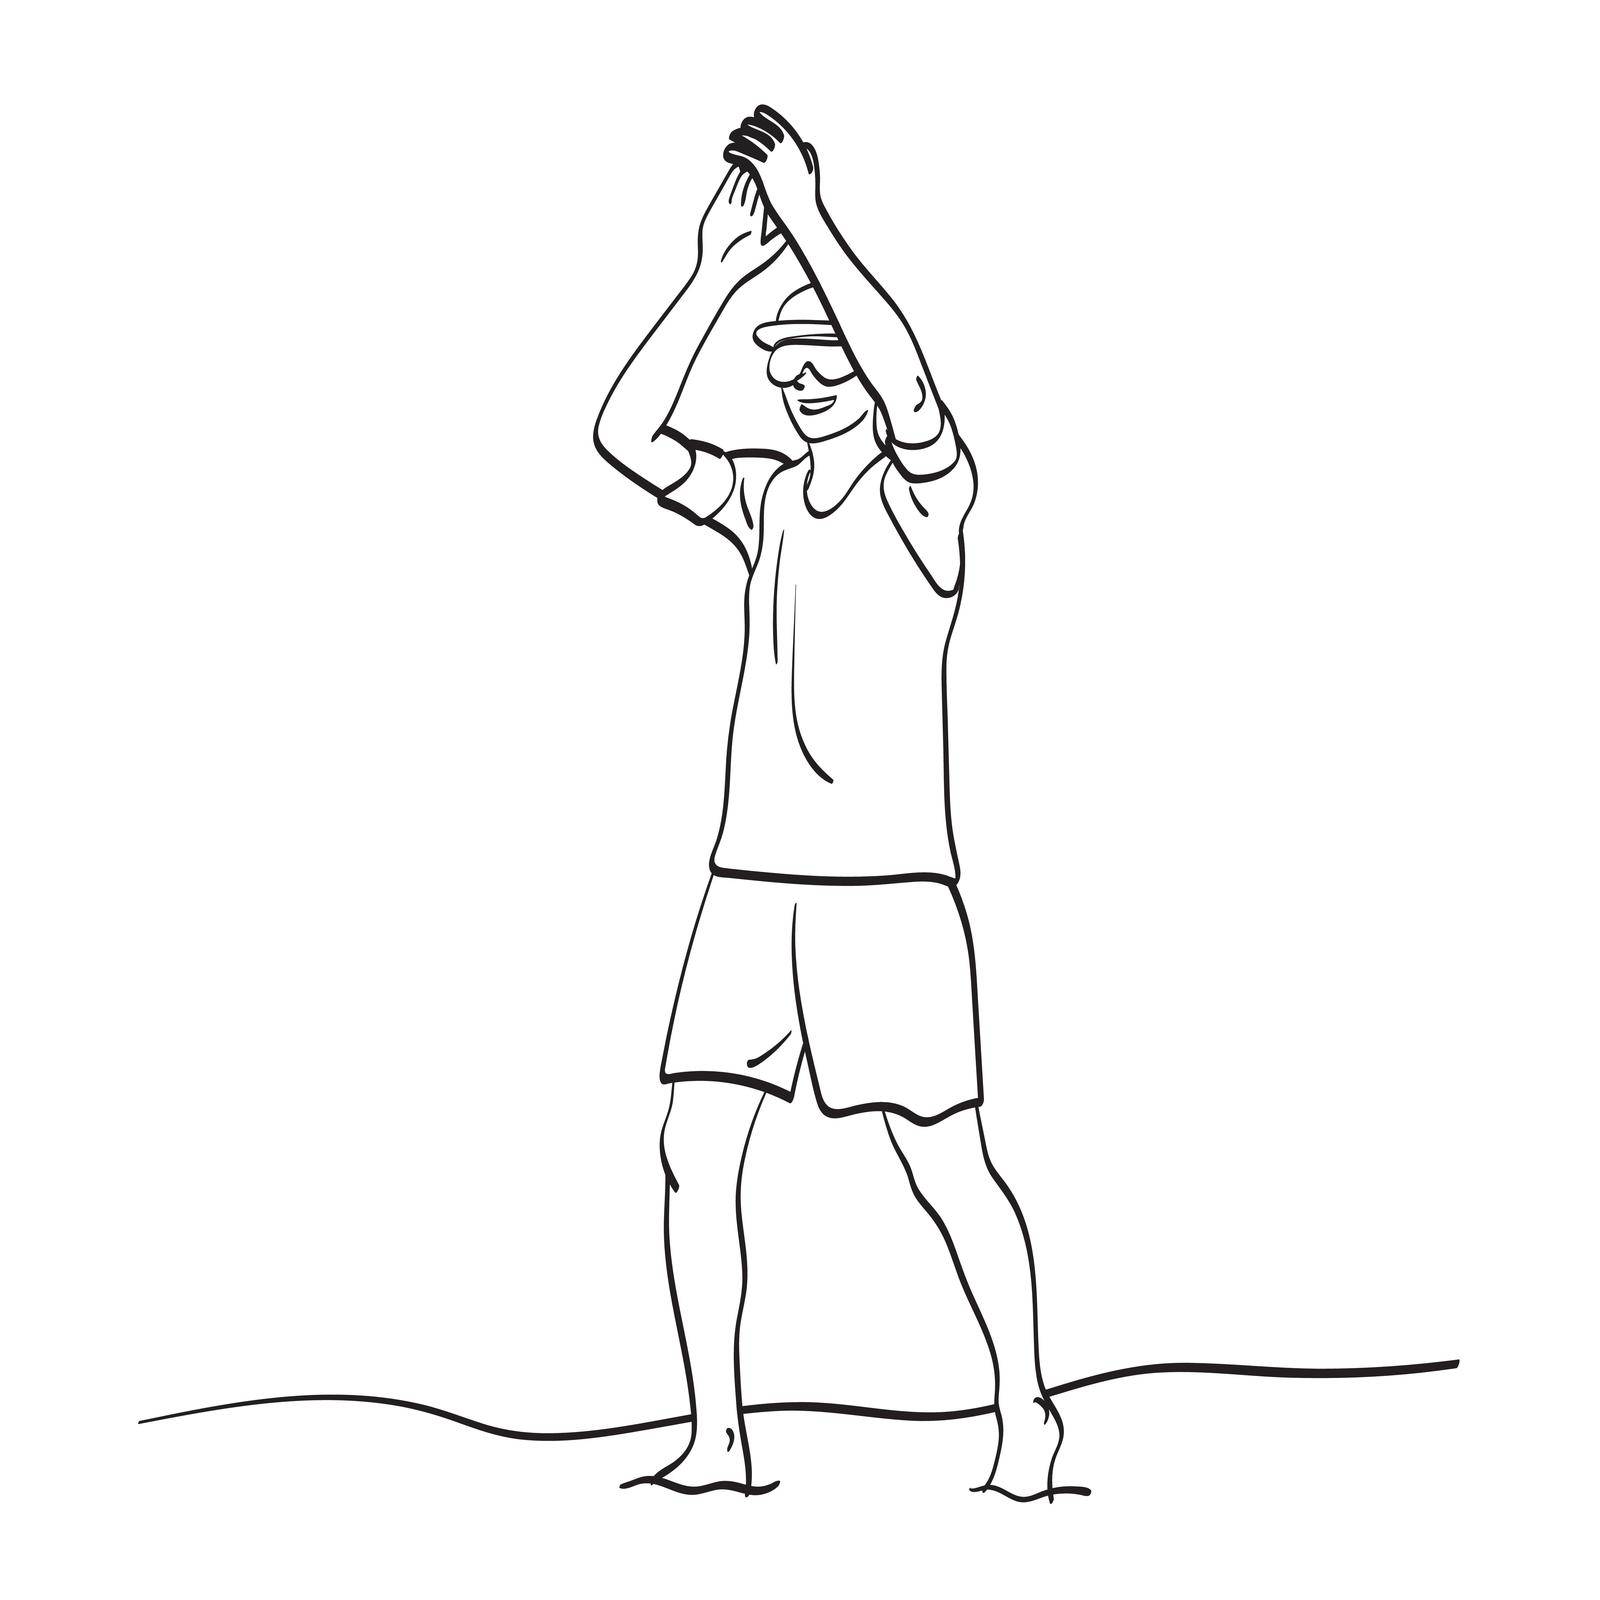 line art full length of beach volleyball player crapping his hands after winning the game illustration vector hand drawn isolated on white background by tidarattj